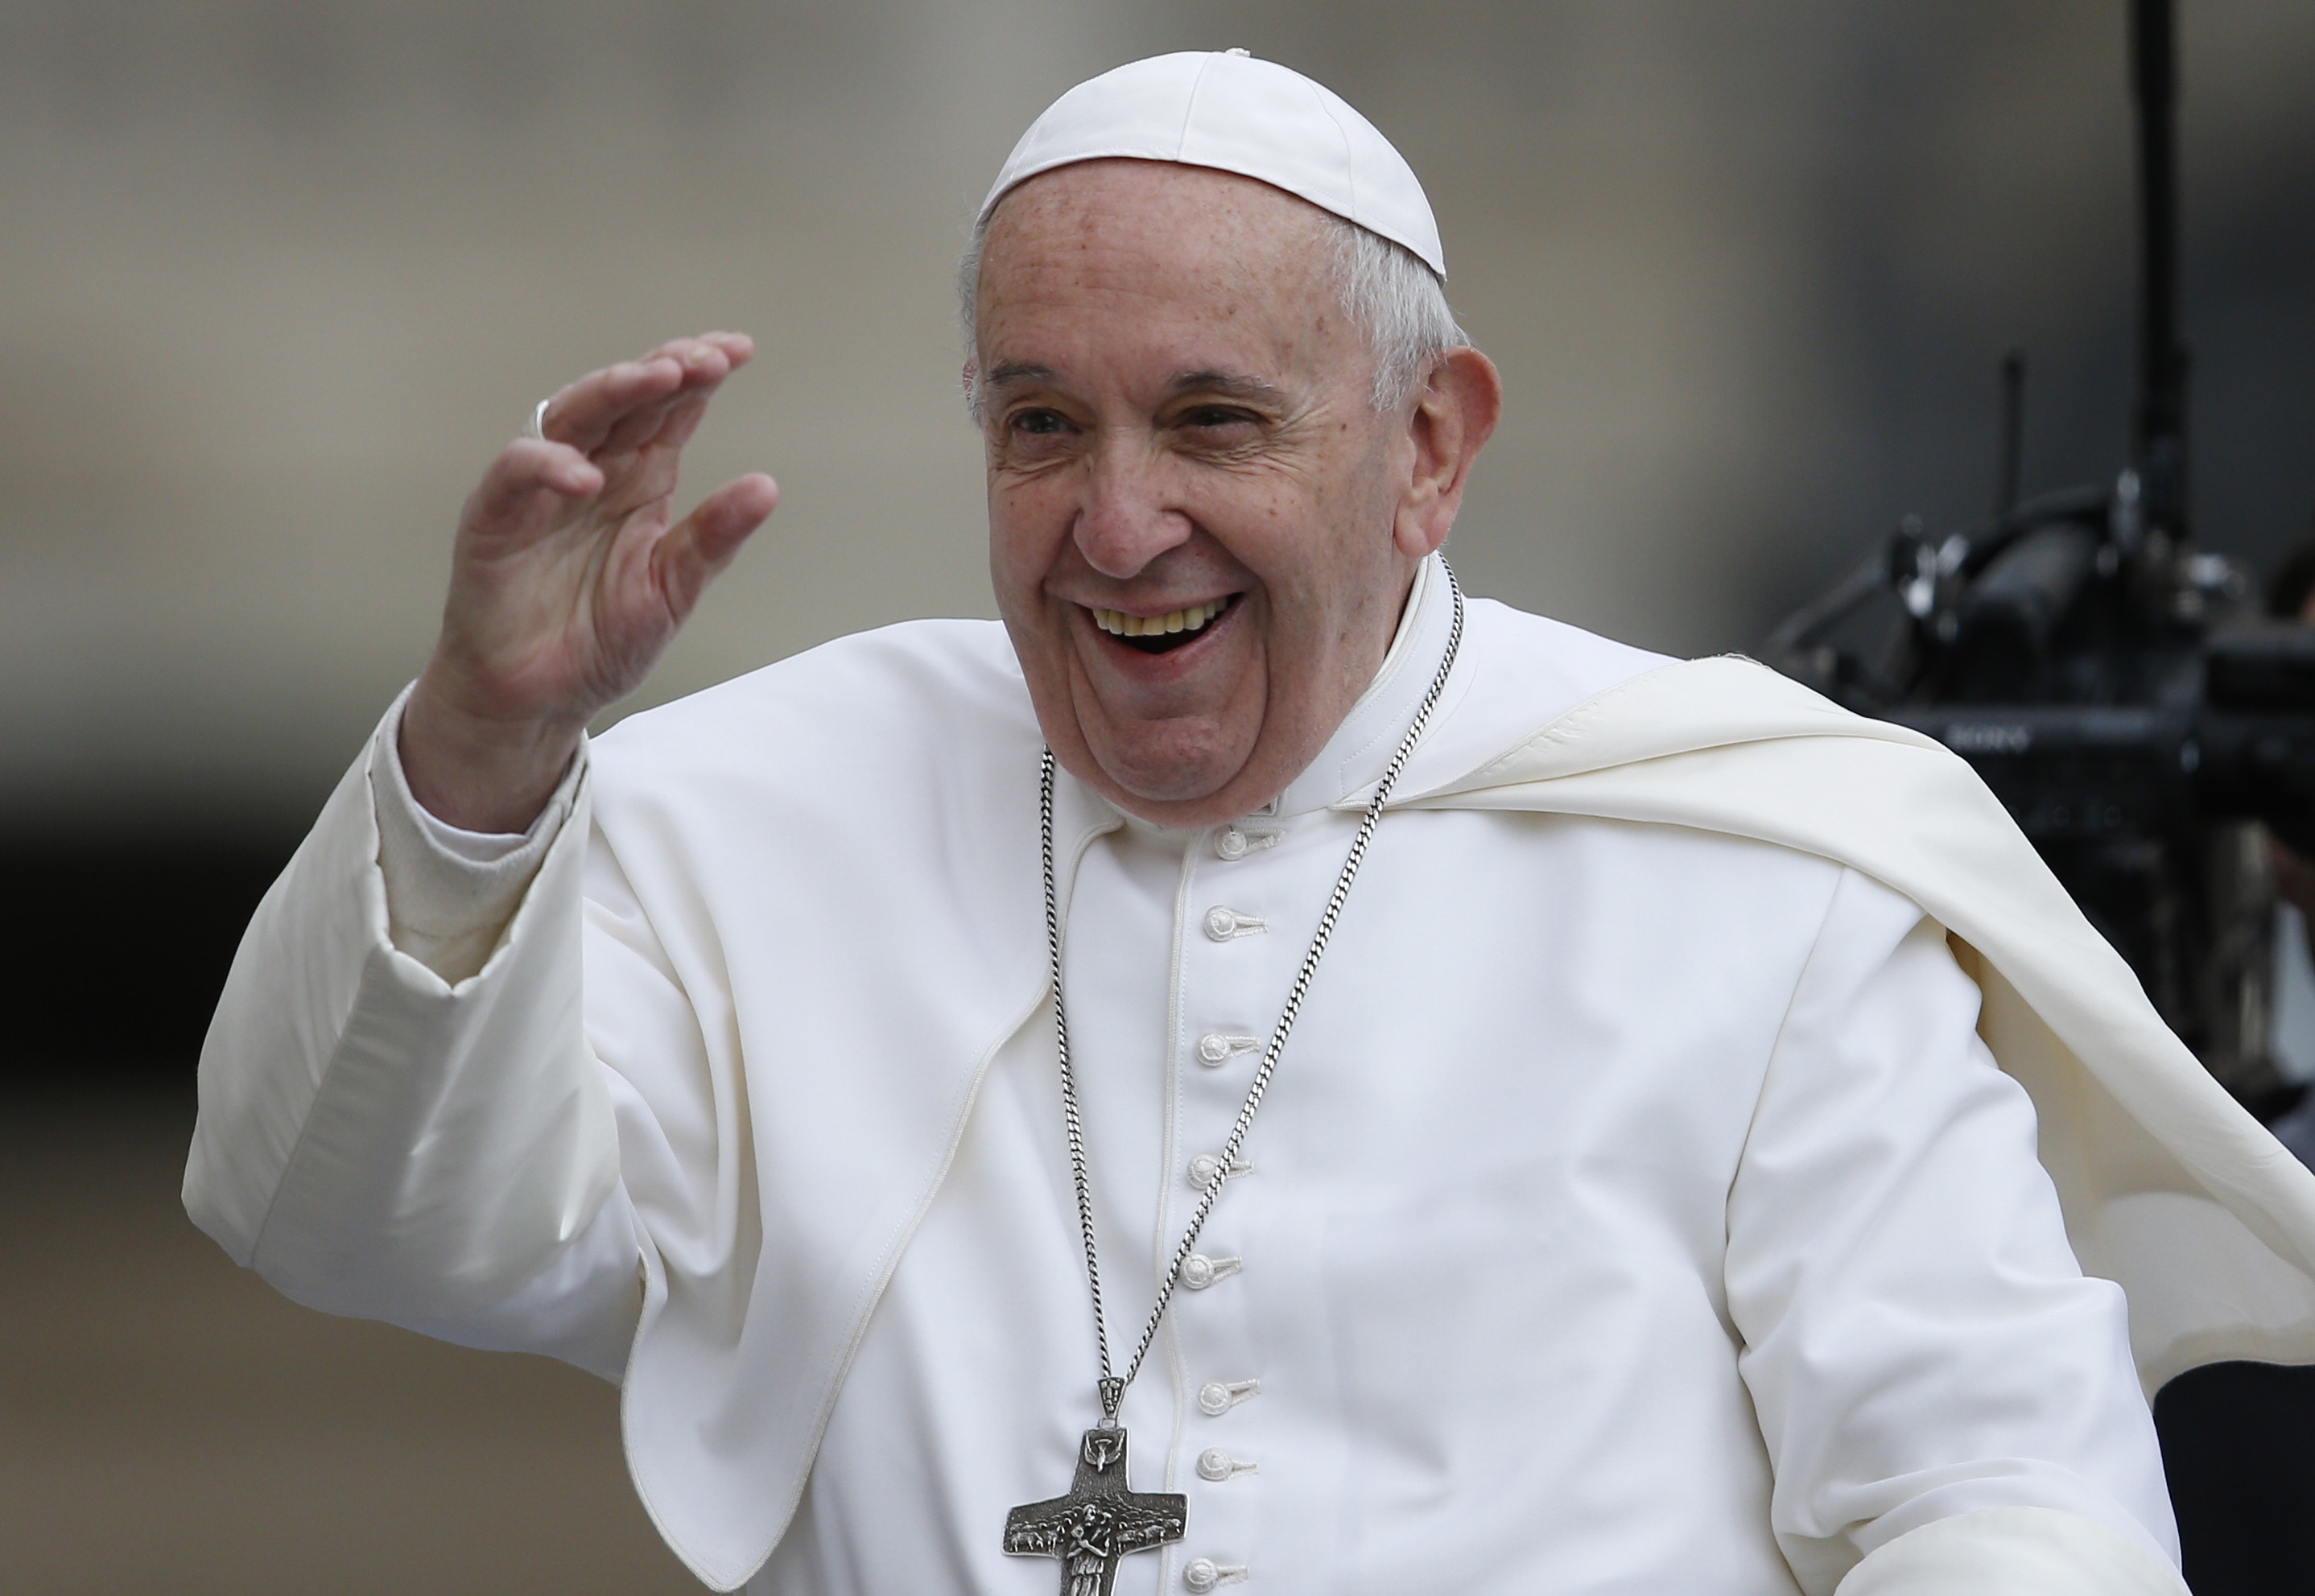 Jesus is always ready to help free people evil, pope says | National Catholic Reporter